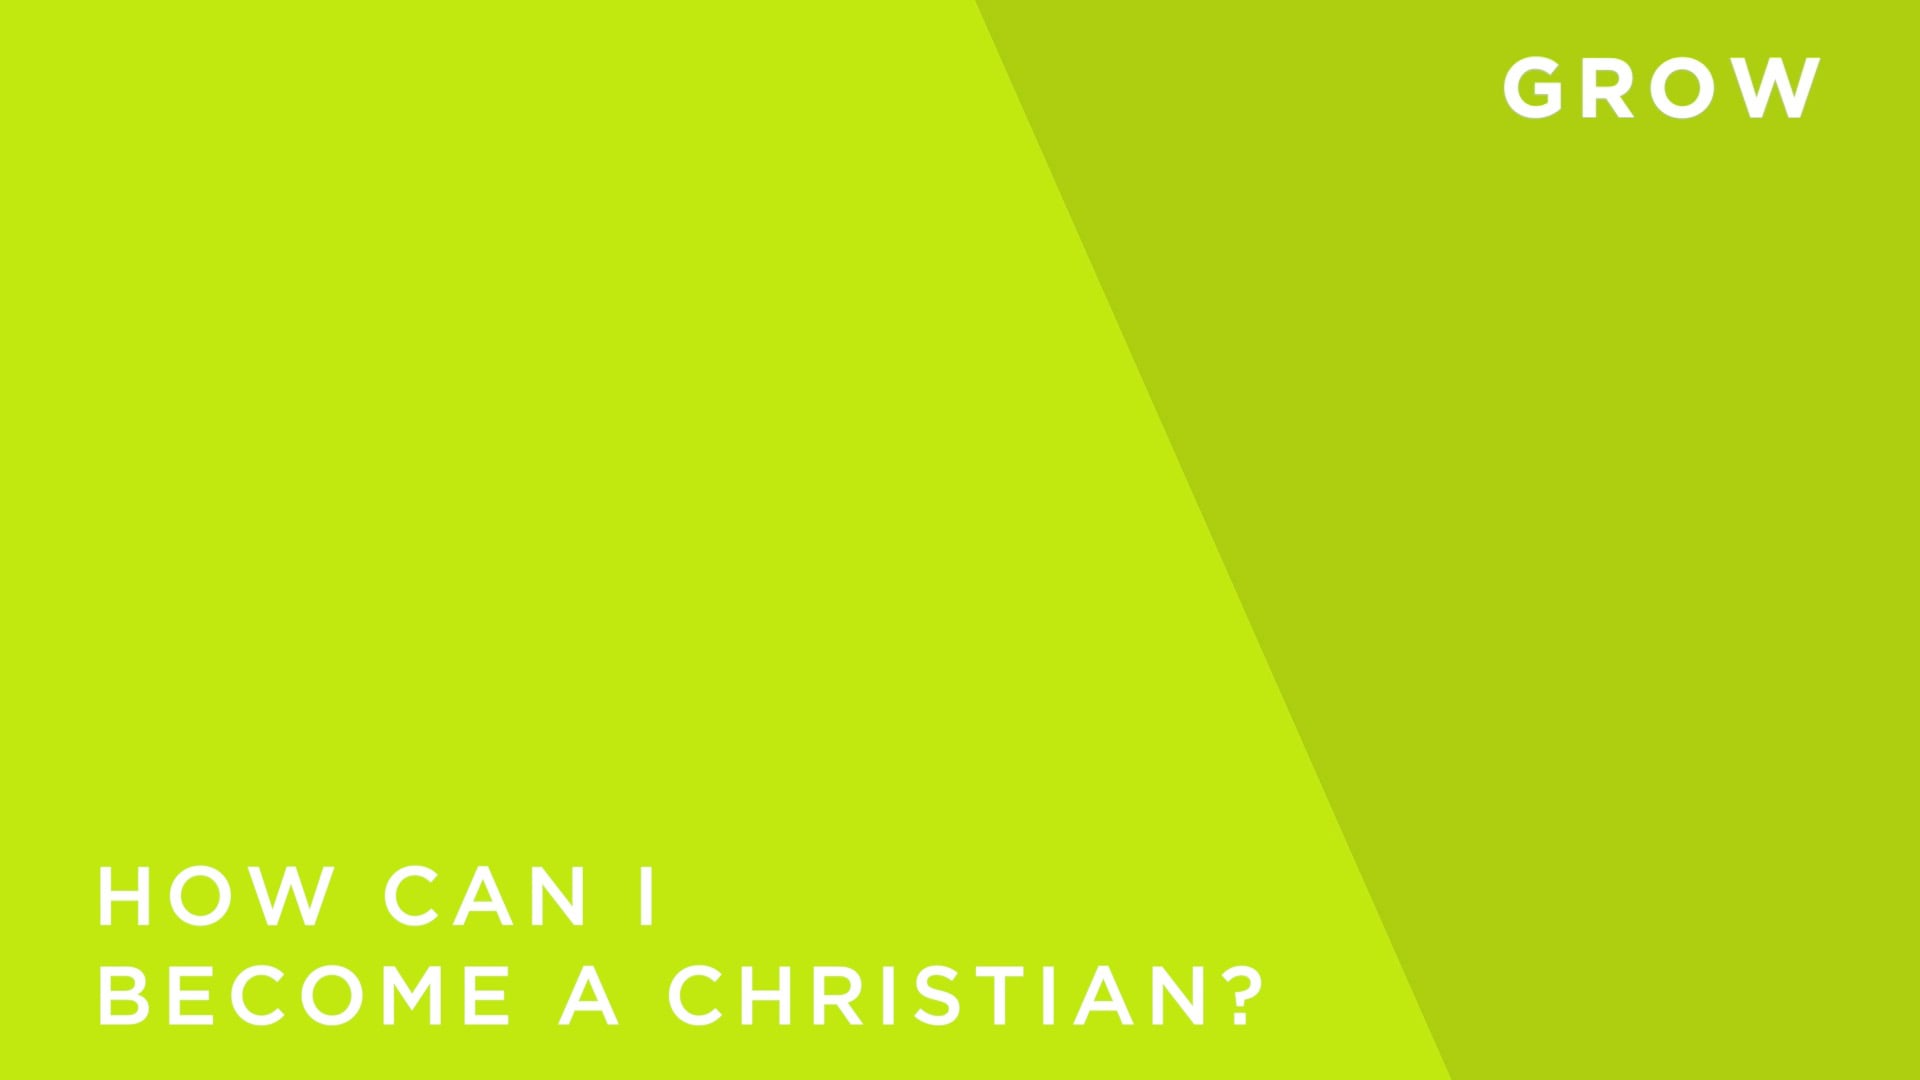 How Can I Become a Christian?